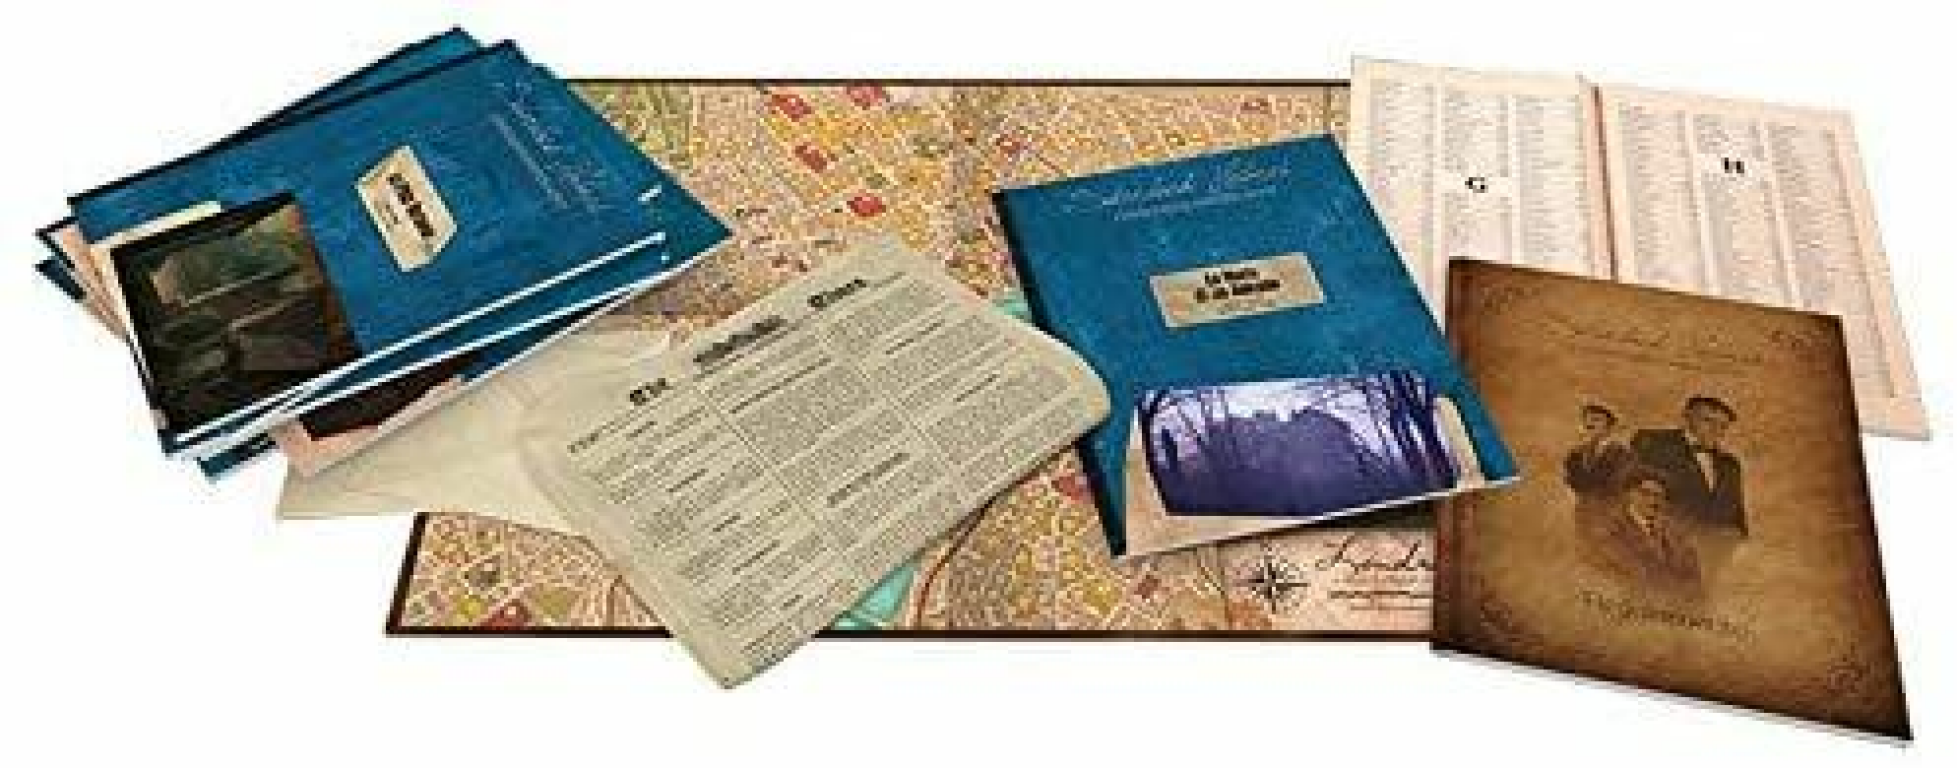 Sherlock Holmes Consulting Detective: Carlton House & Queen's Park components